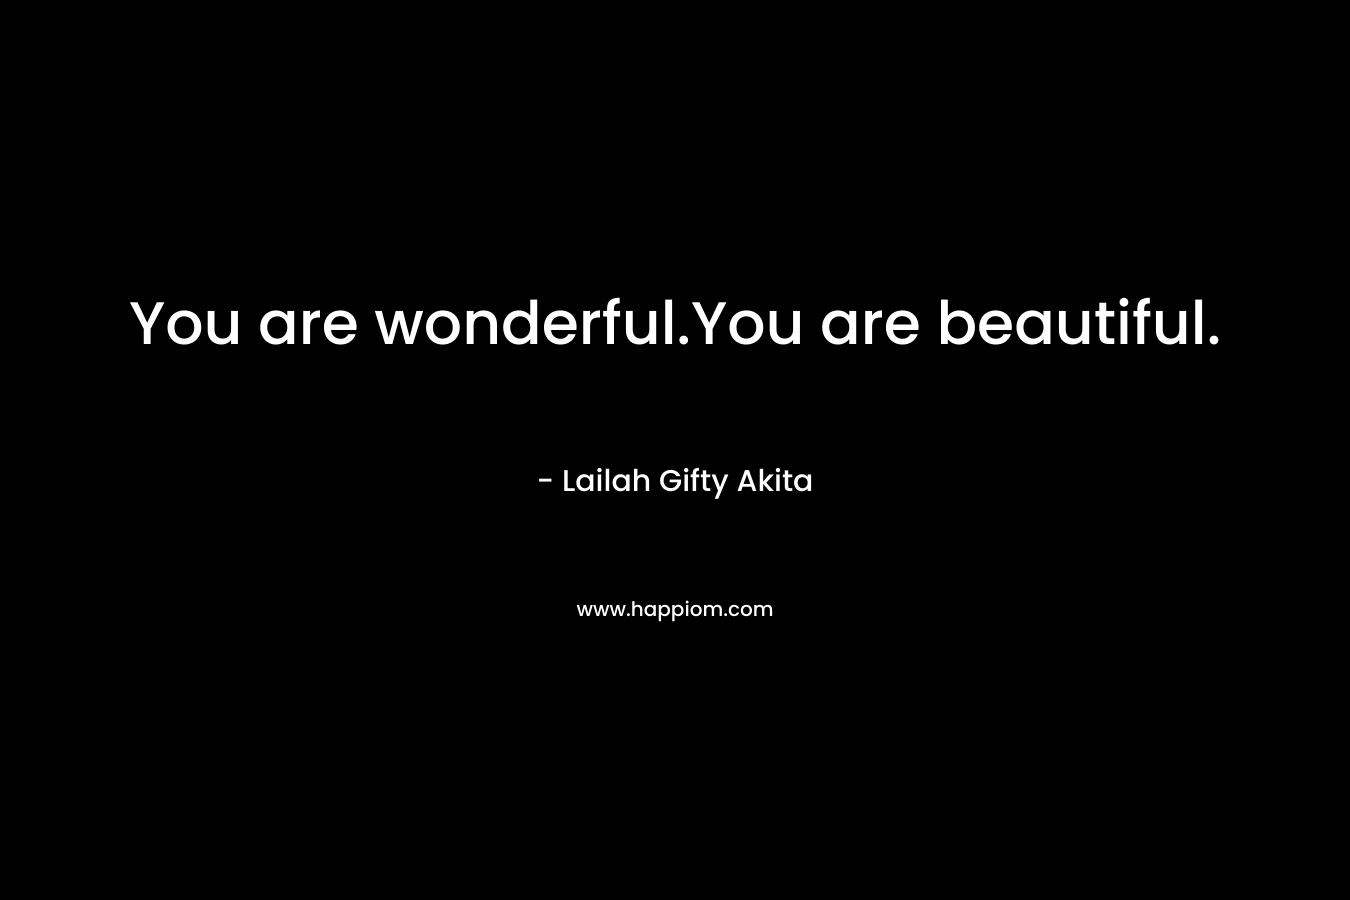 You are wonderful.You are beautiful.